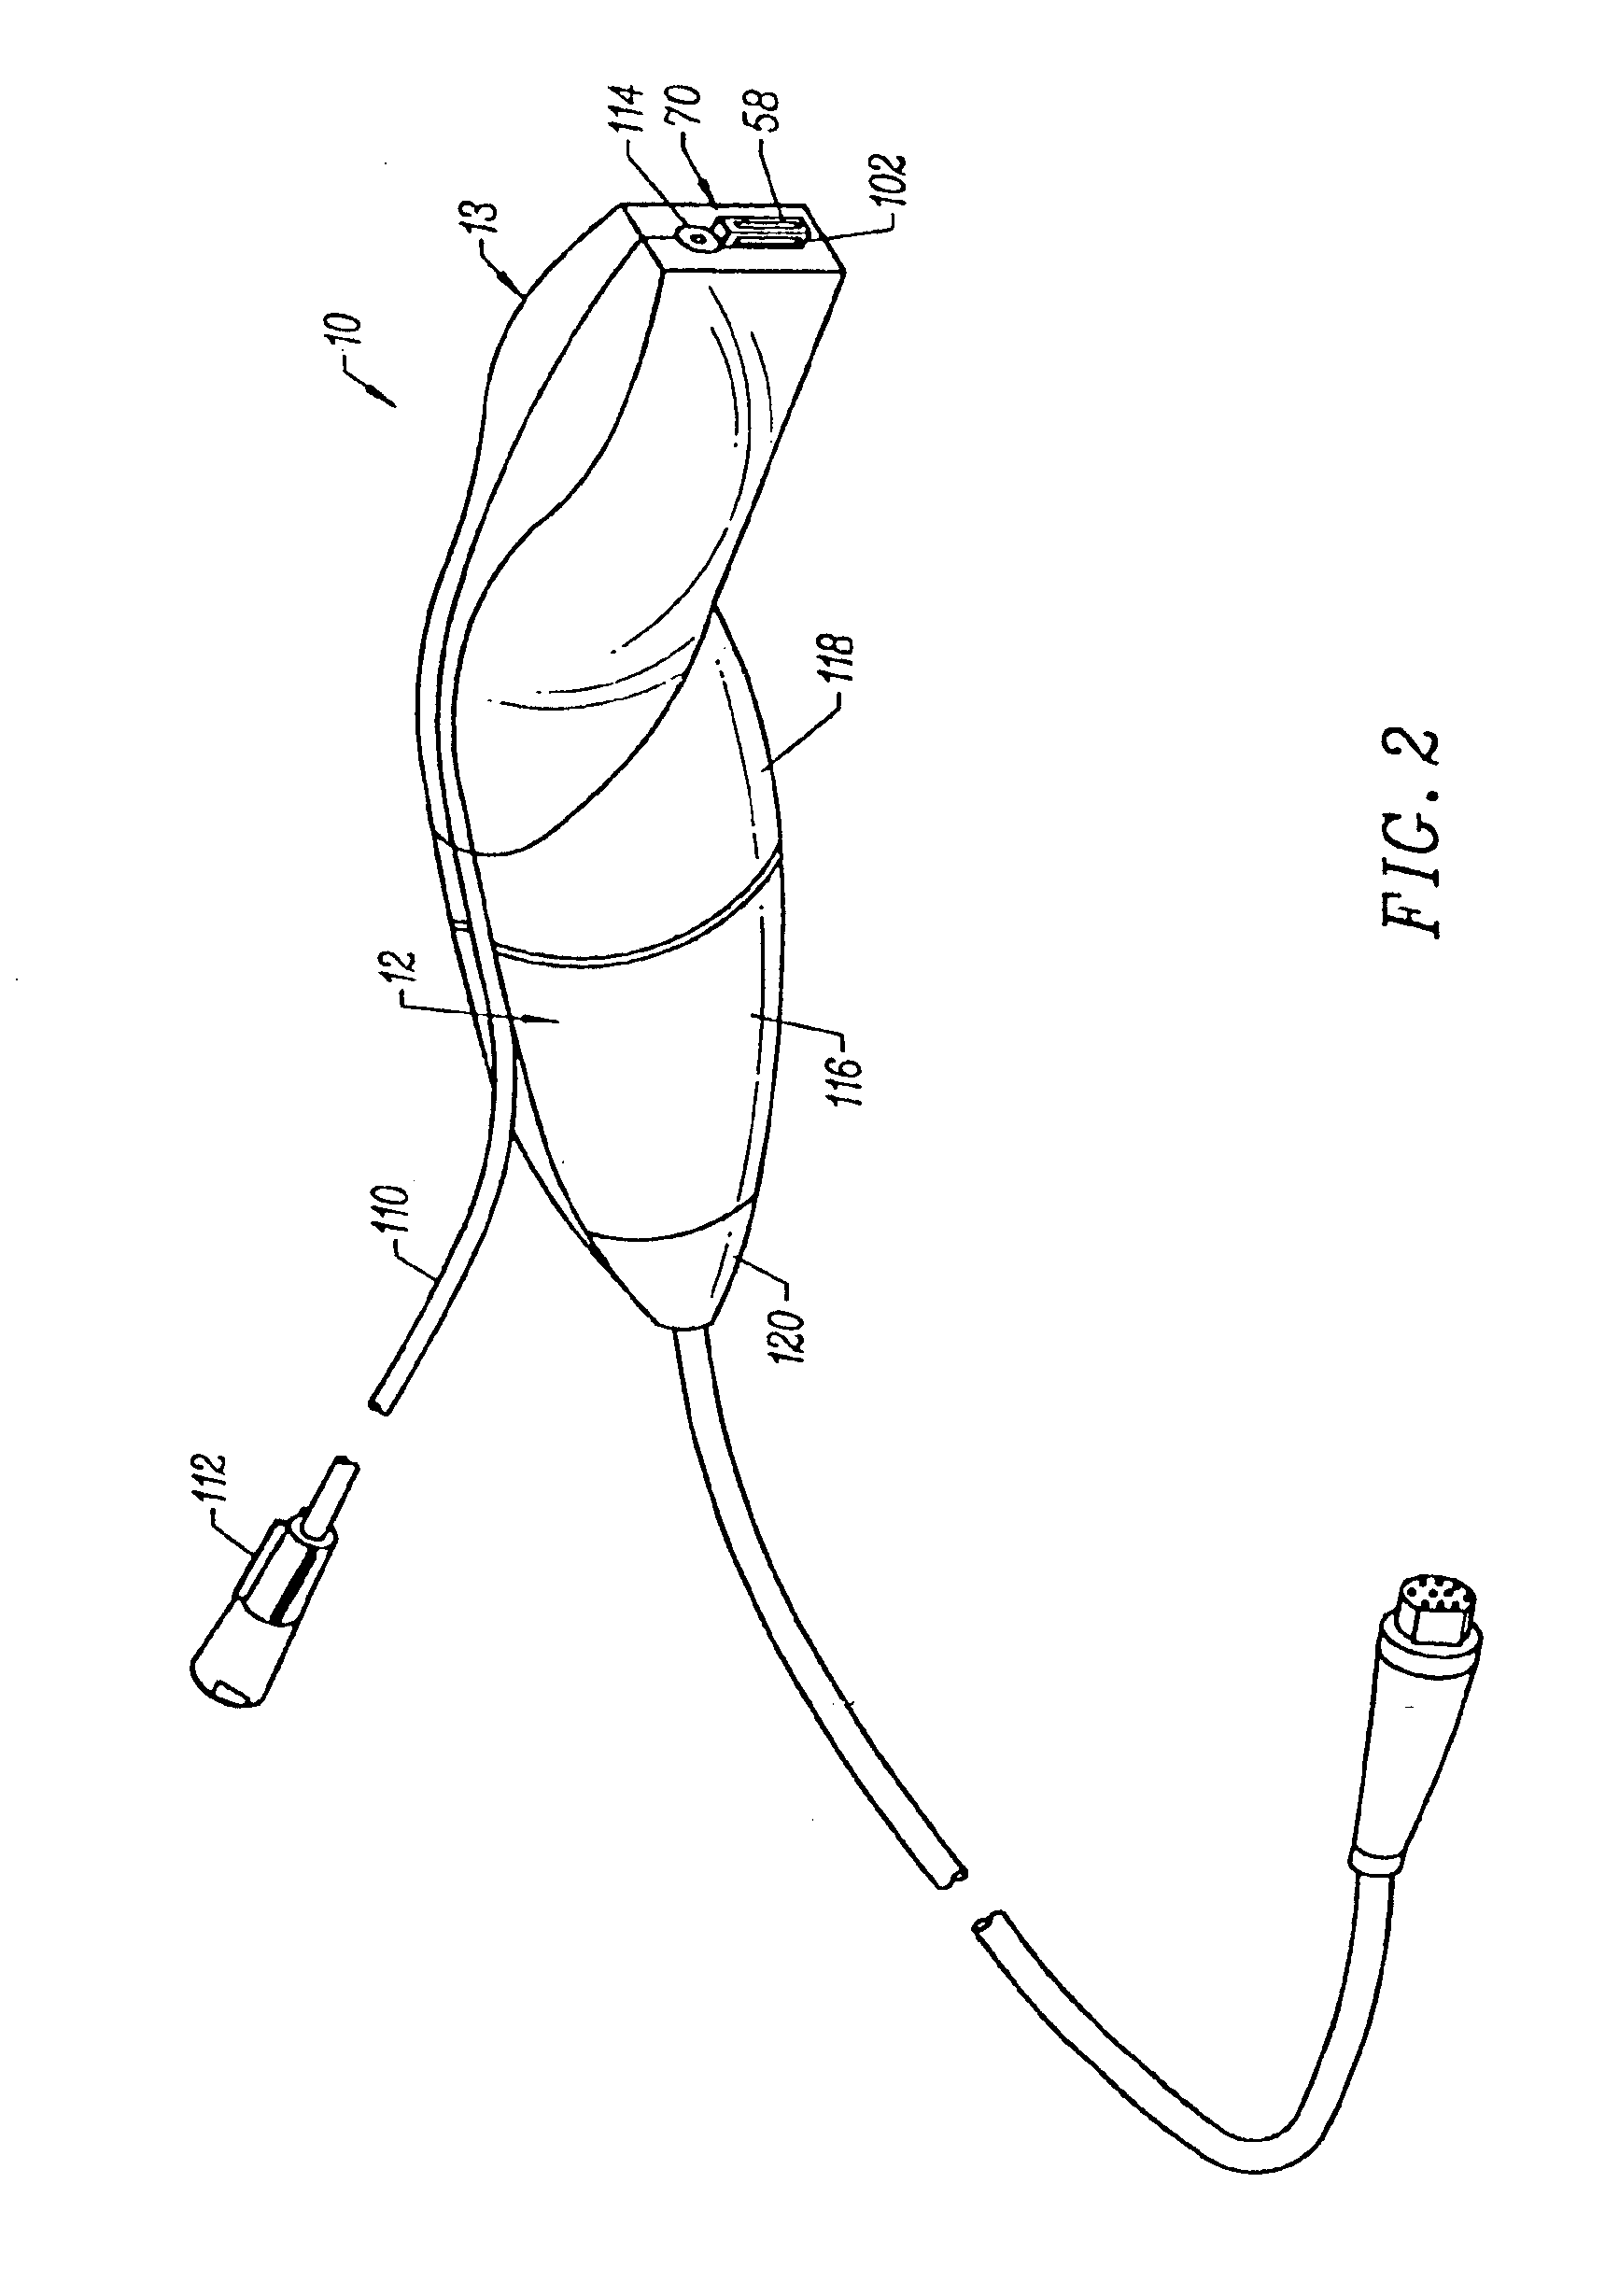 Methods for electrosurgical incisions on external skin surfaces